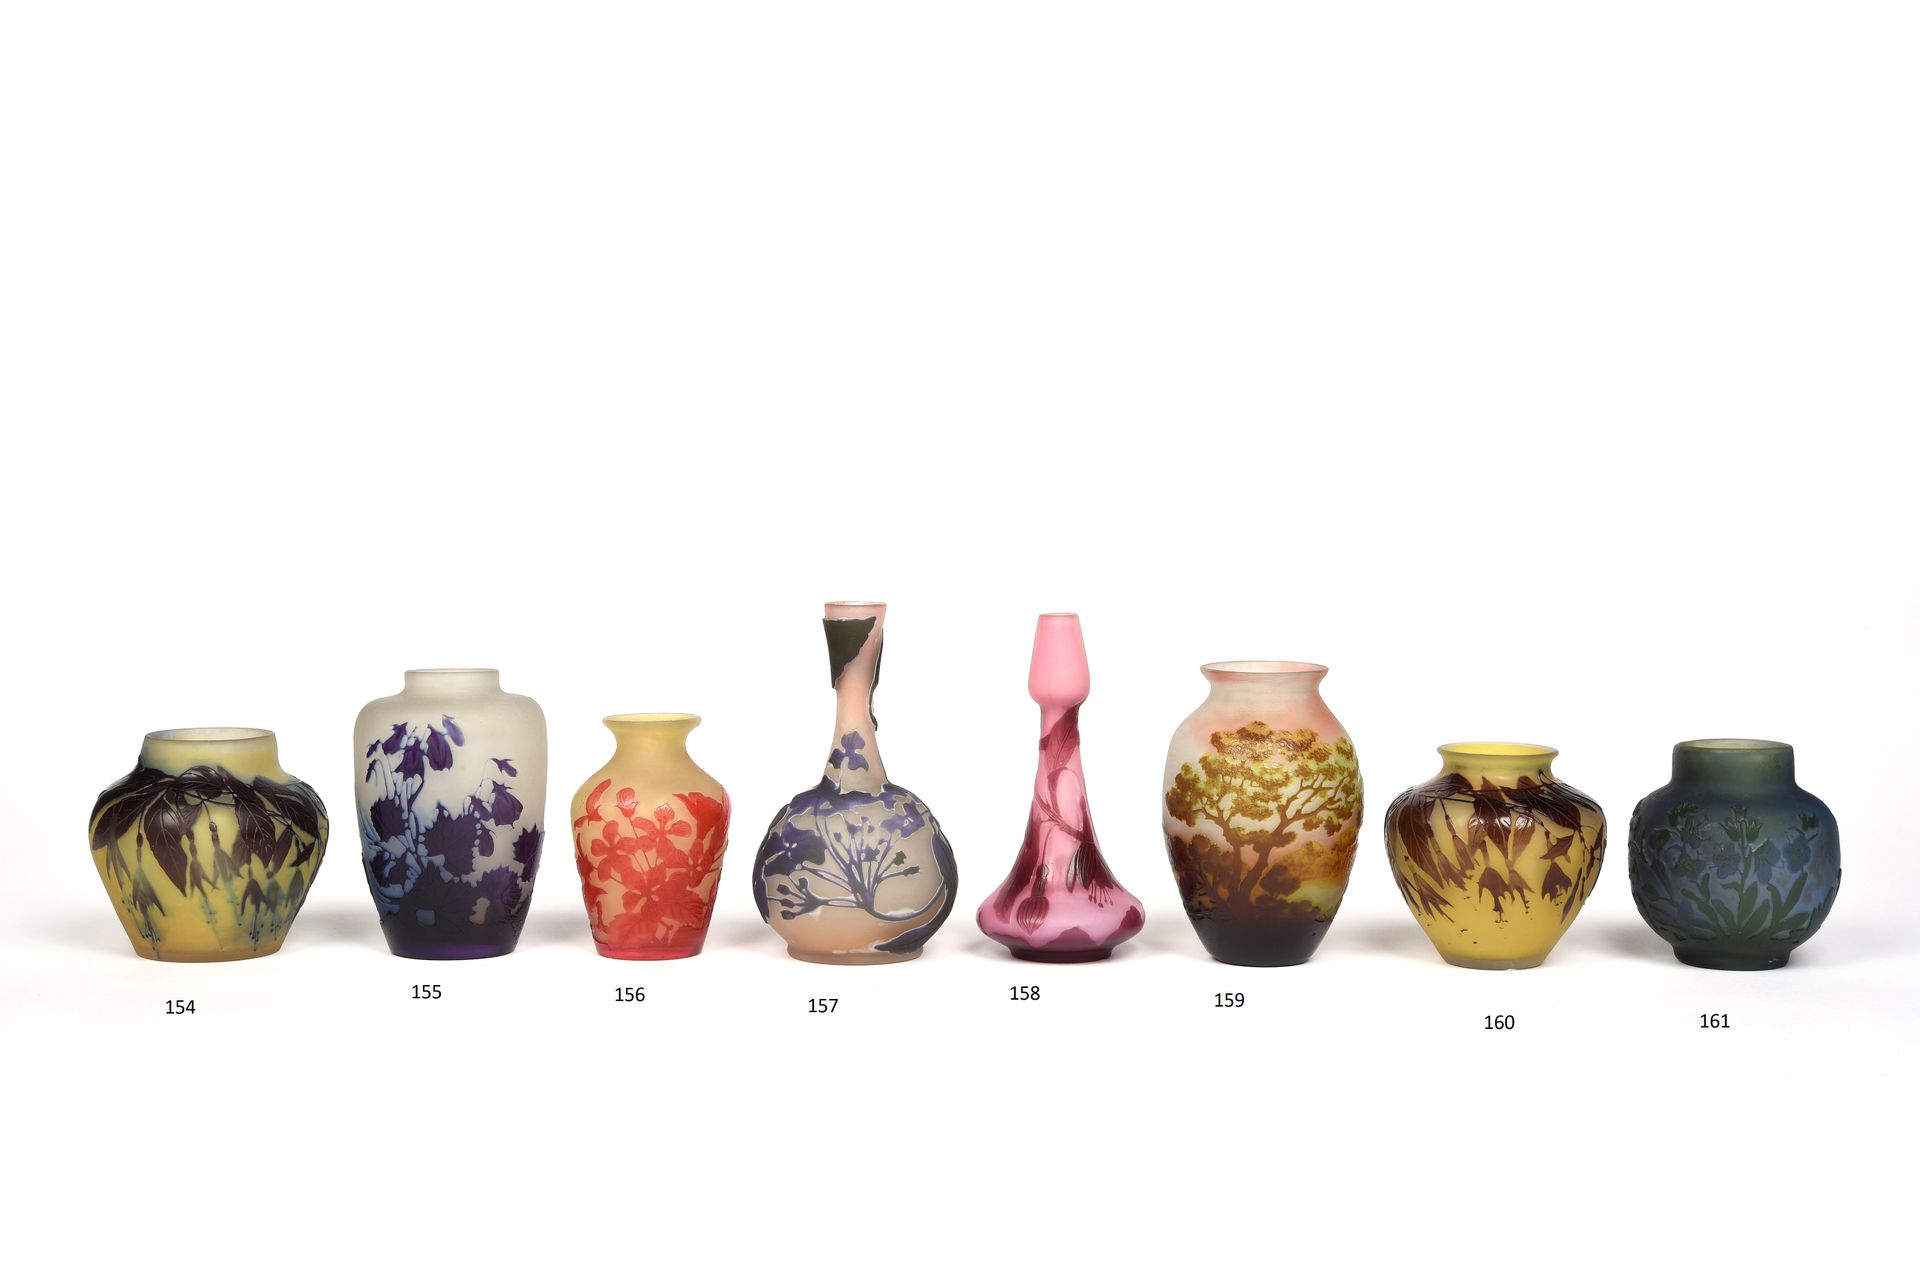 Null ÉMILE GALLÉ (1846-1904)

Small vase in multi-layered glass with floral deco&hellip;